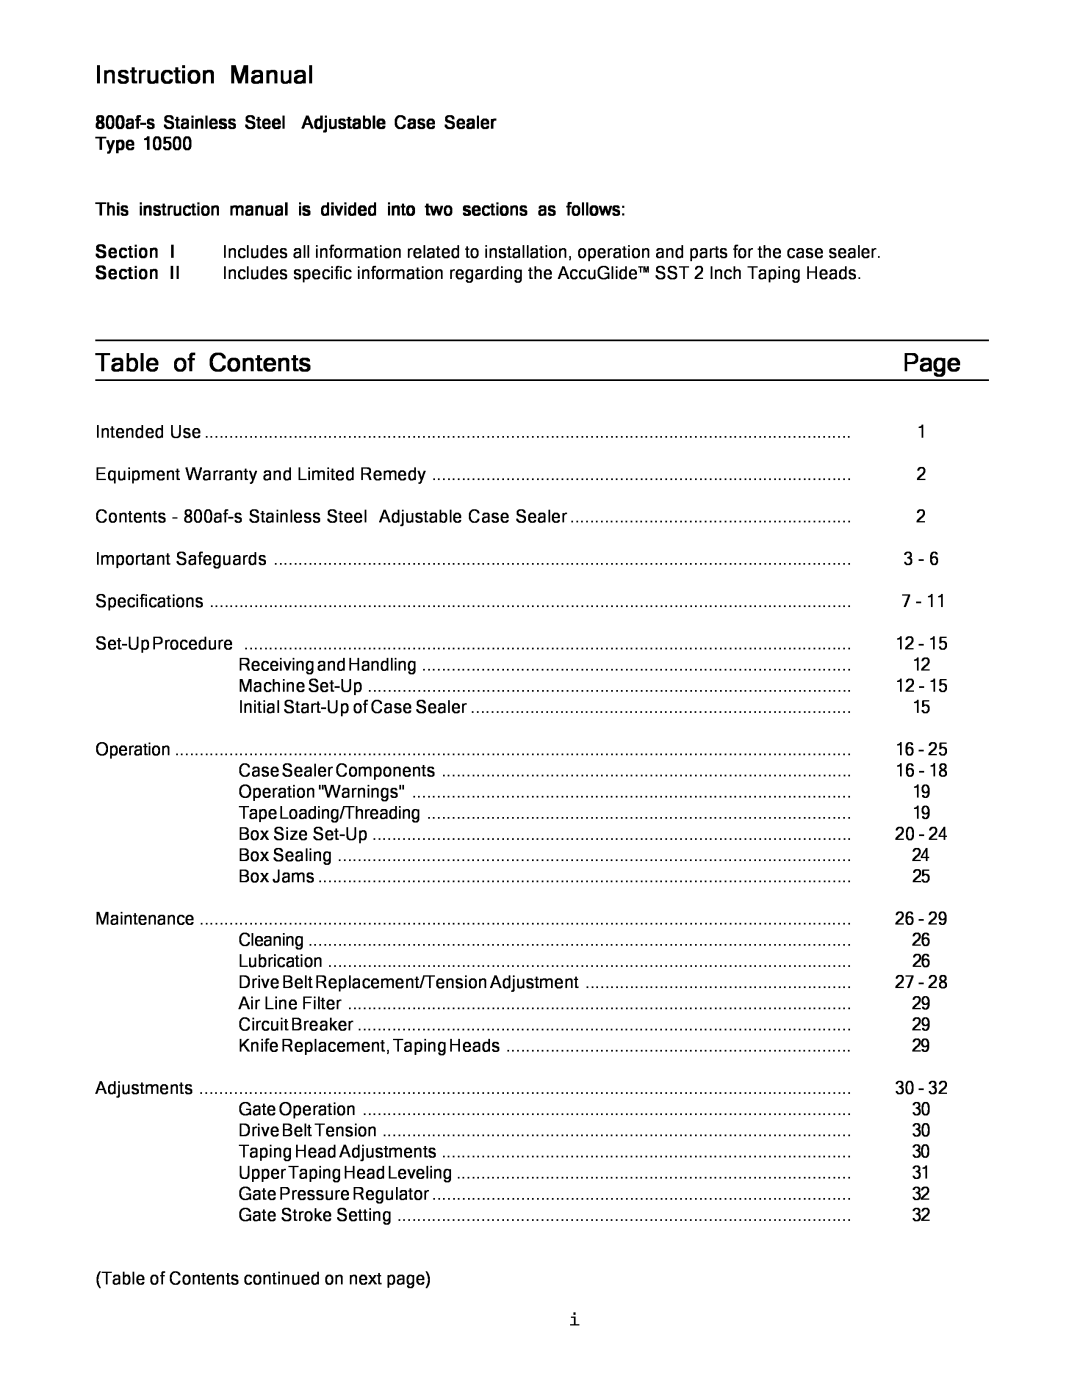 3M 800af-s manual Instruction Manual, Table of Contents, Page 